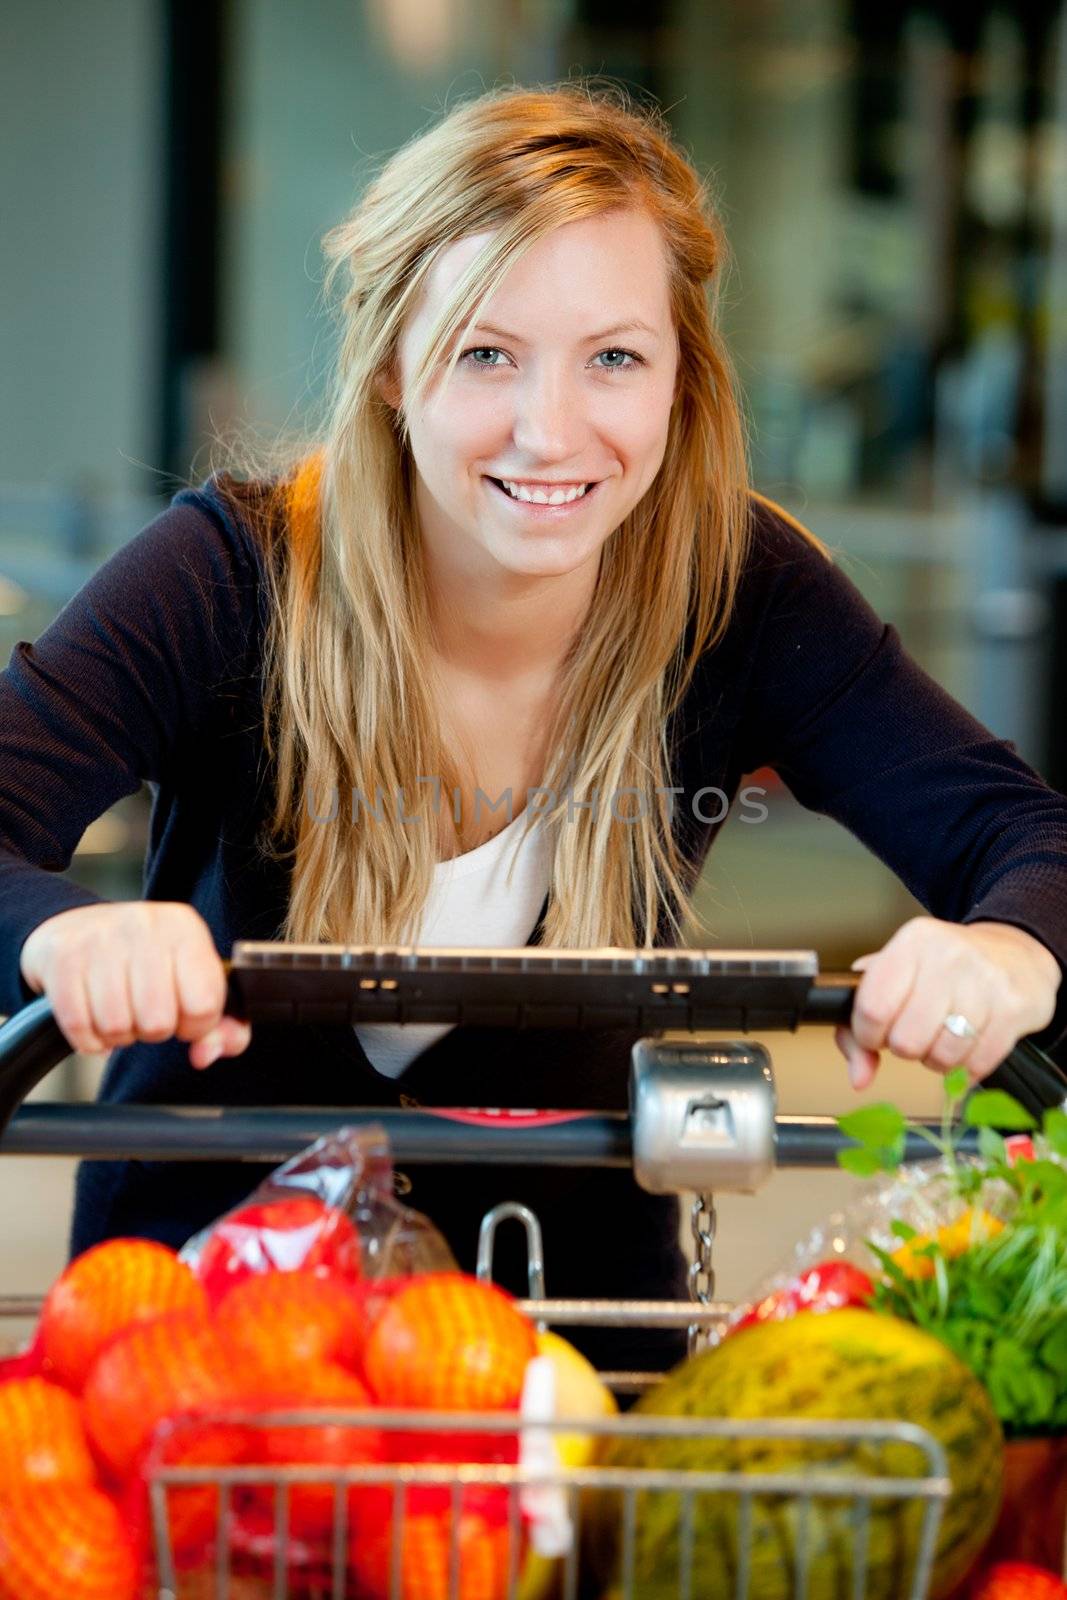 A happy shopping woman with grocery cart full of fruits and vegetables